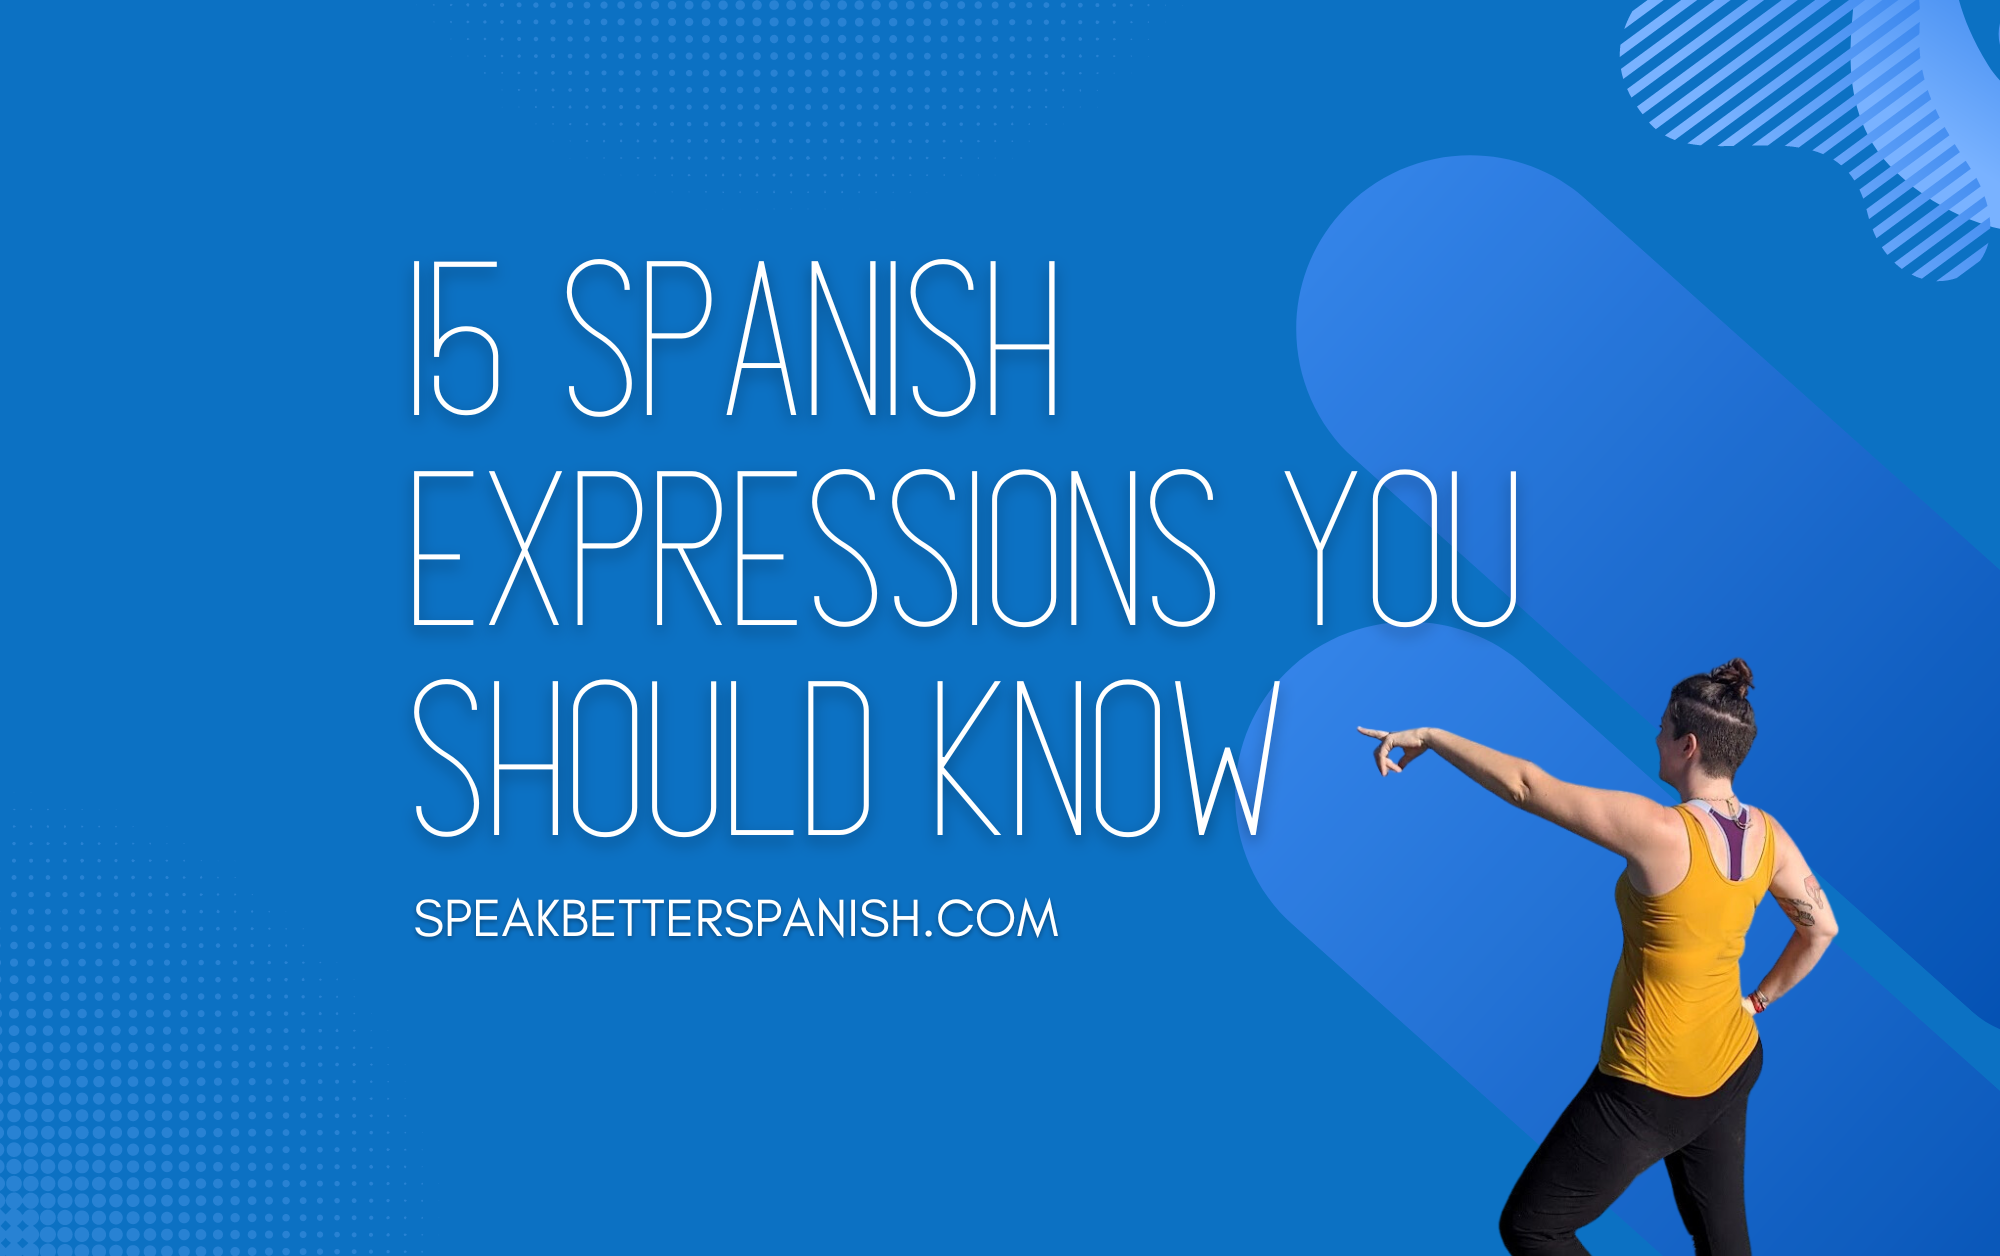 15 Useful Spanish Expressions You Should Know - Speak Better Spanish